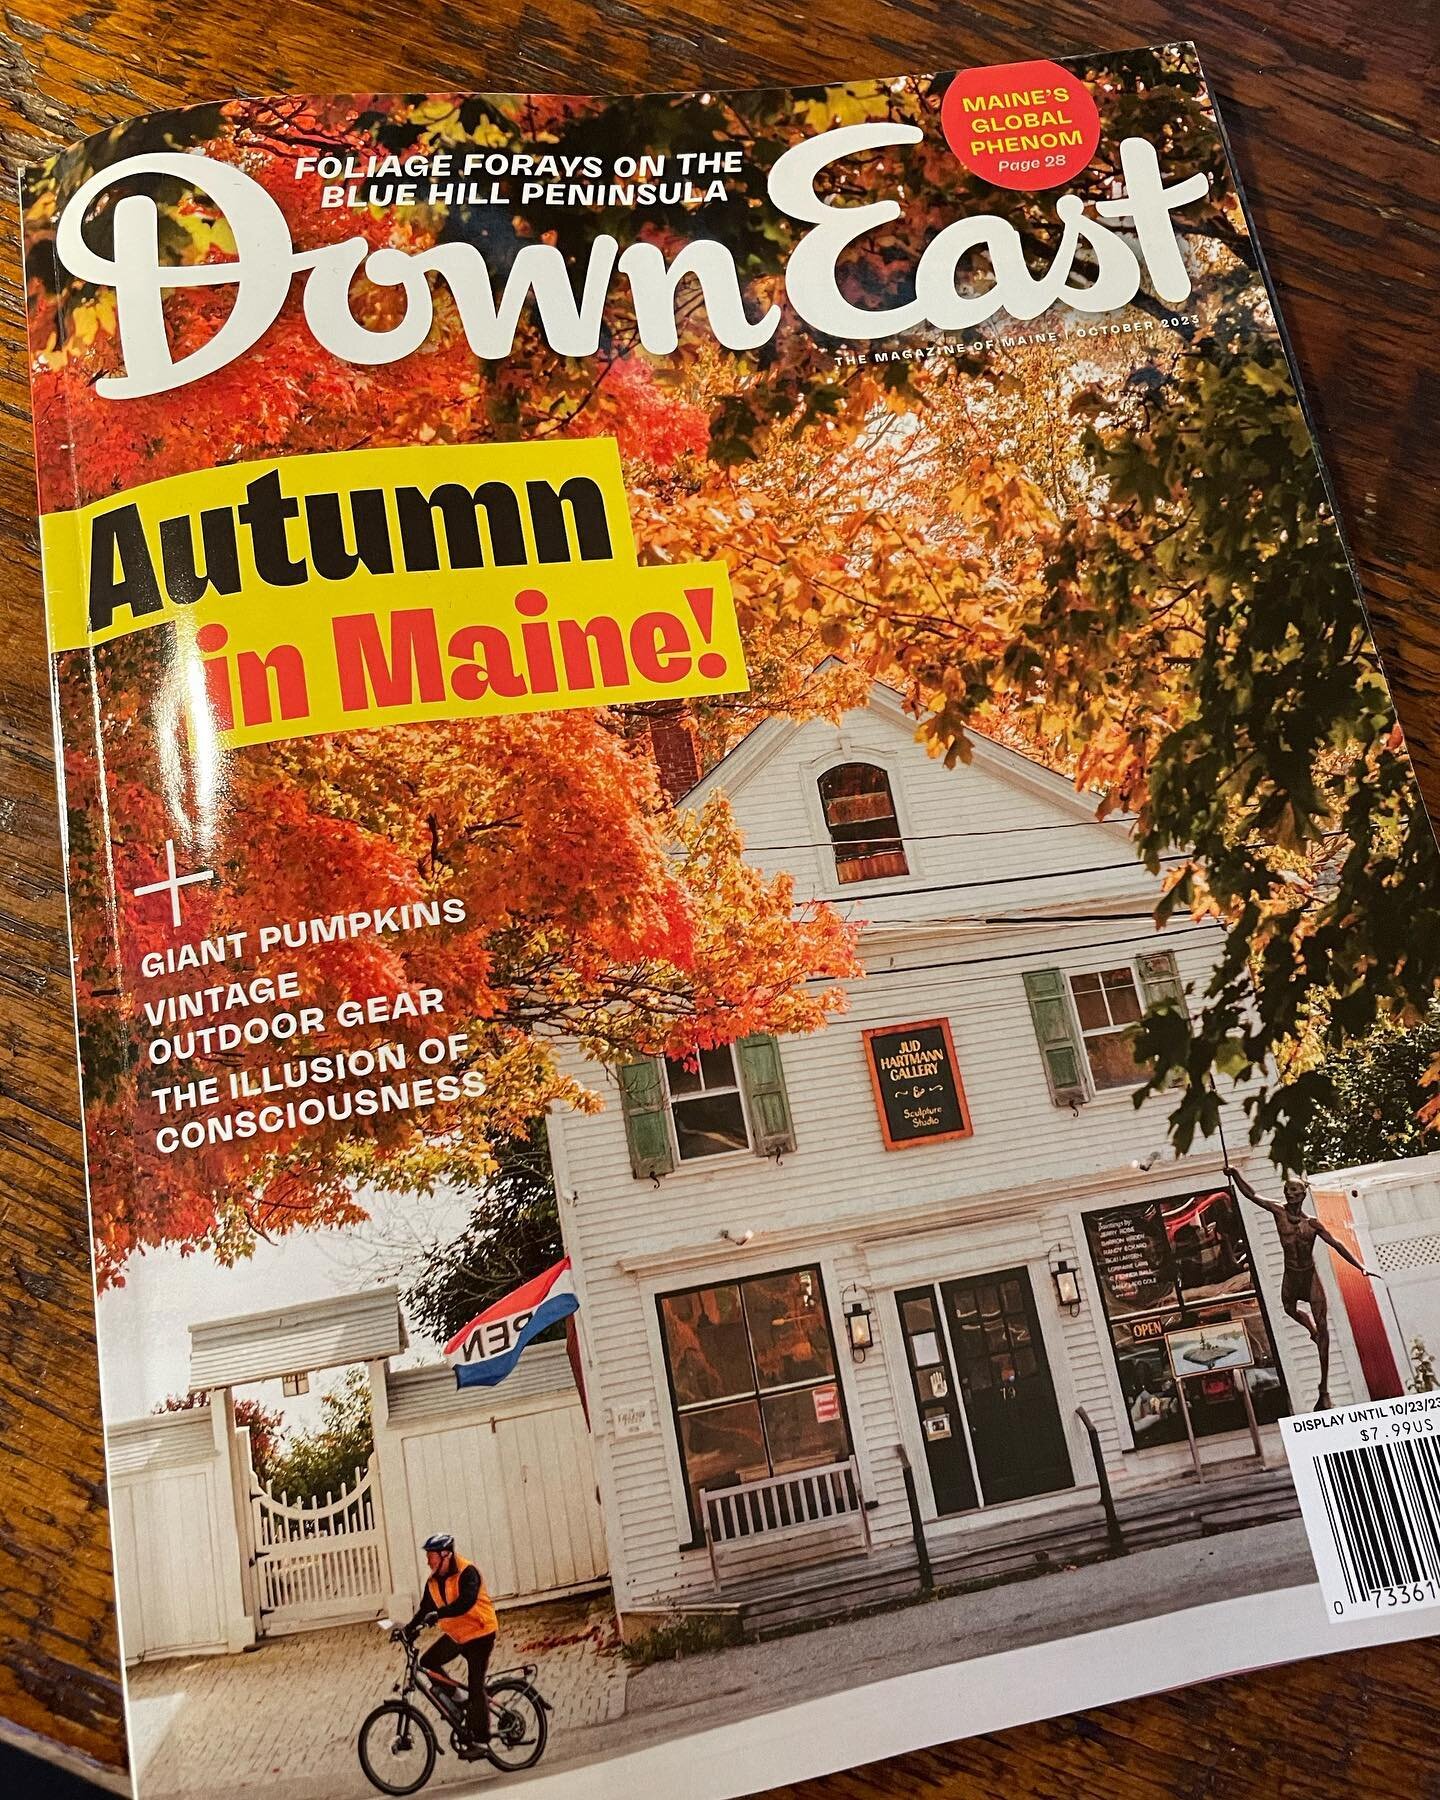 A little late to share my full-page photo in this months&rsquo;s Down East magazine. If you&rsquo;re a subscriber, check out Page 10. (If you&rsquo;re not, sneak a peak at your favorite newsstand!). I&rsquo;m back in the US now, and will start up on 